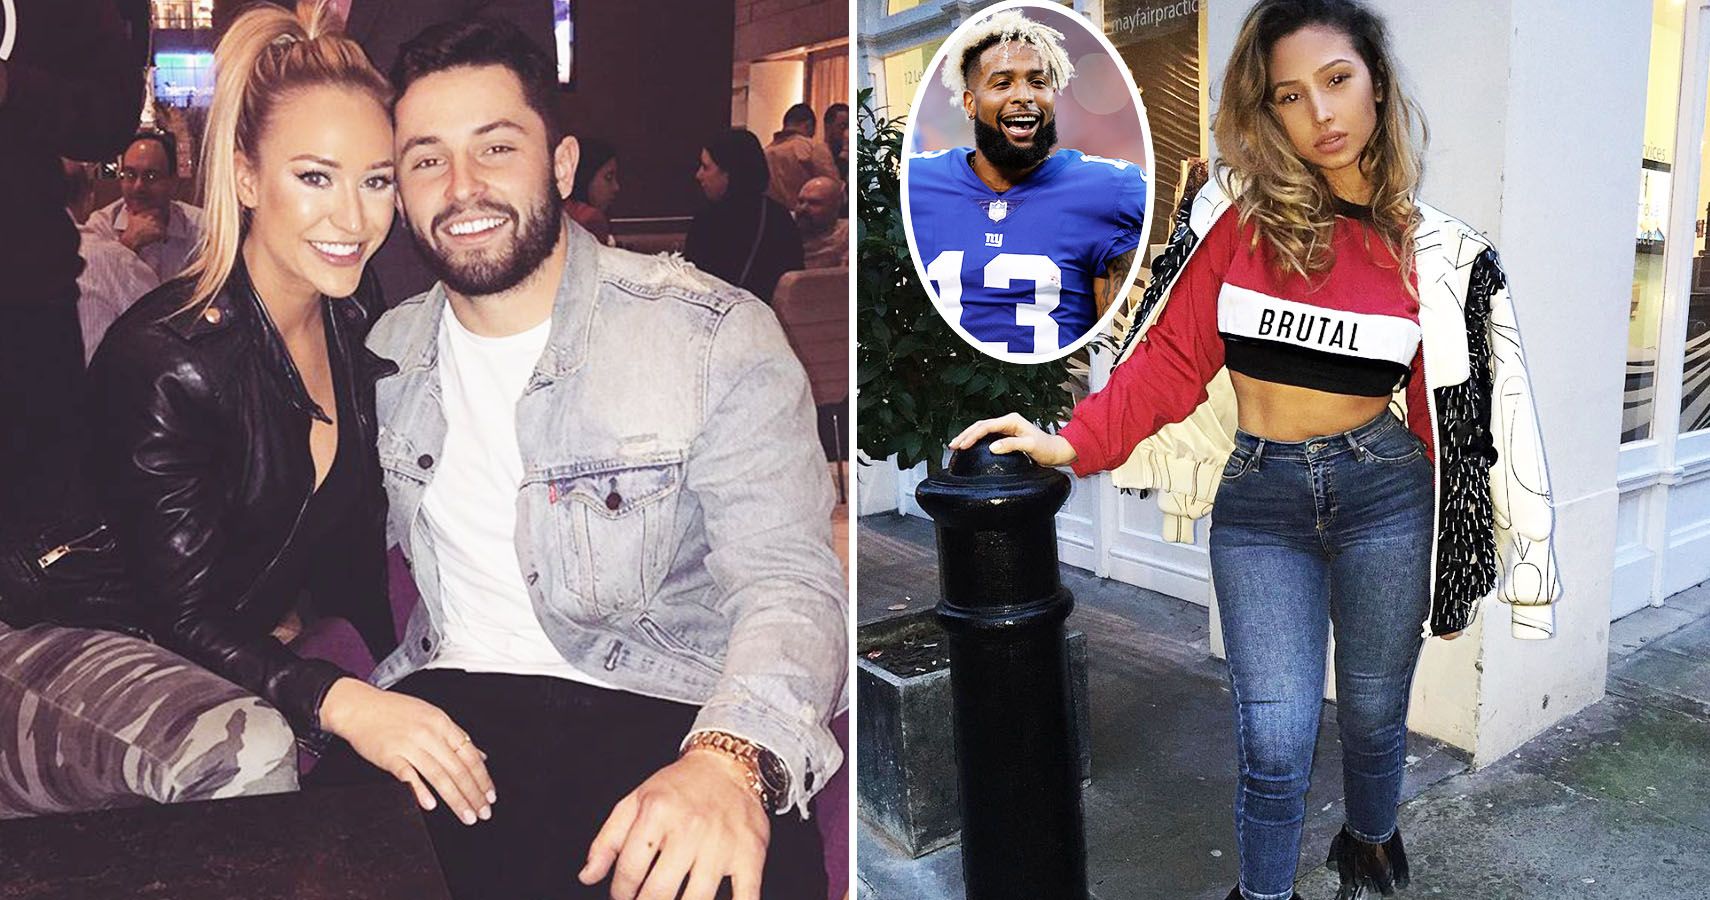 Landon Collins wife: Is Landon Collins married to Victoria Lowery?